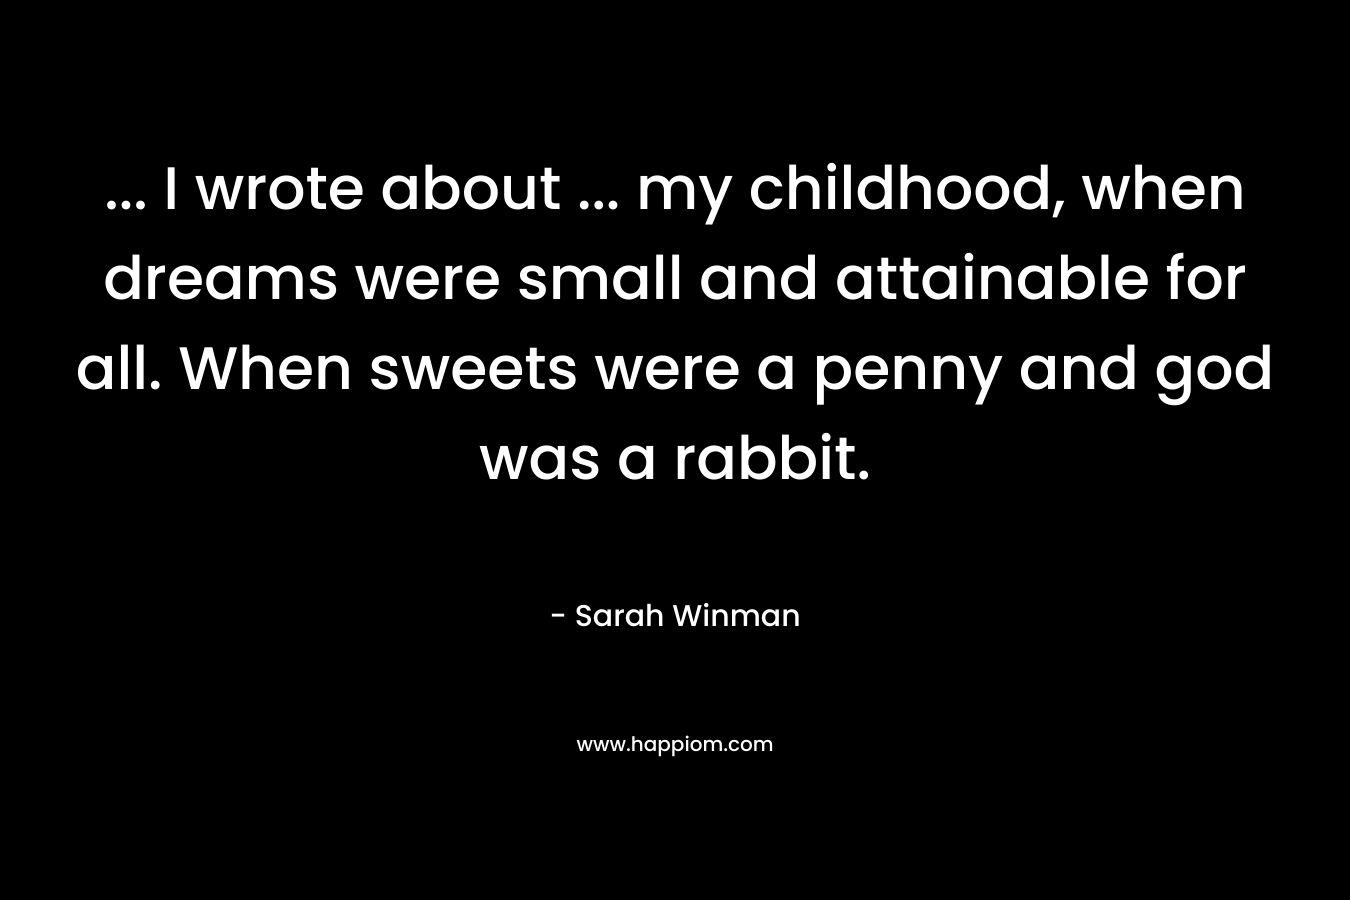 ... I wrote about ... my childhood, when dreams were small and attainable for all. When sweets were a penny and god was a rabbit.